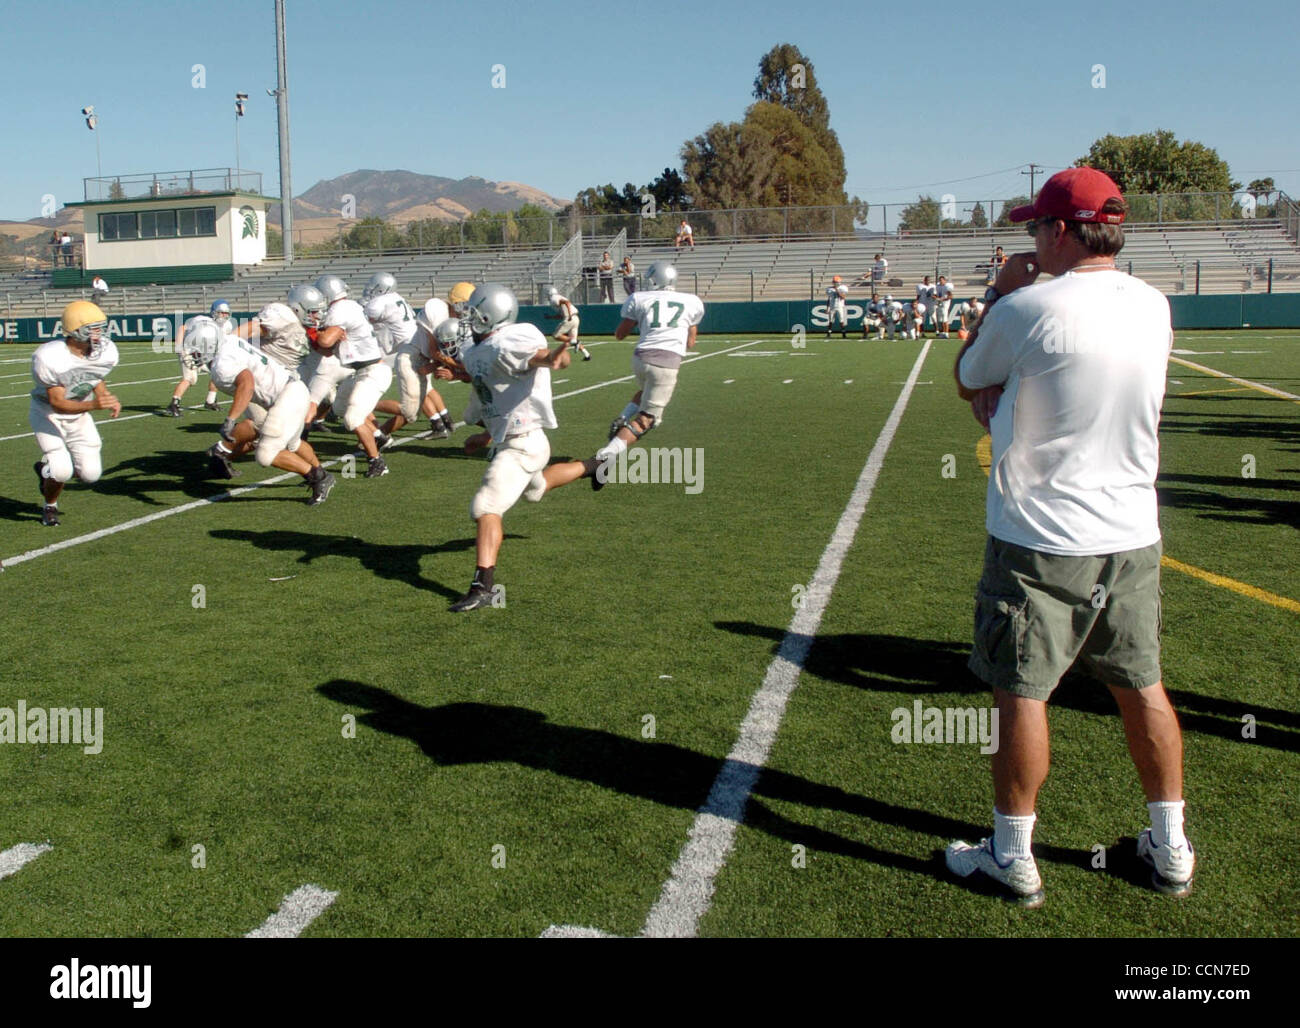 Head coach Bob Ladouceur,right, watches his offense during practice at De La Salle high school in Concord Calif., Thursday August 26,2004.  (Contra Costa Times/Bob Larson) Stock Photo